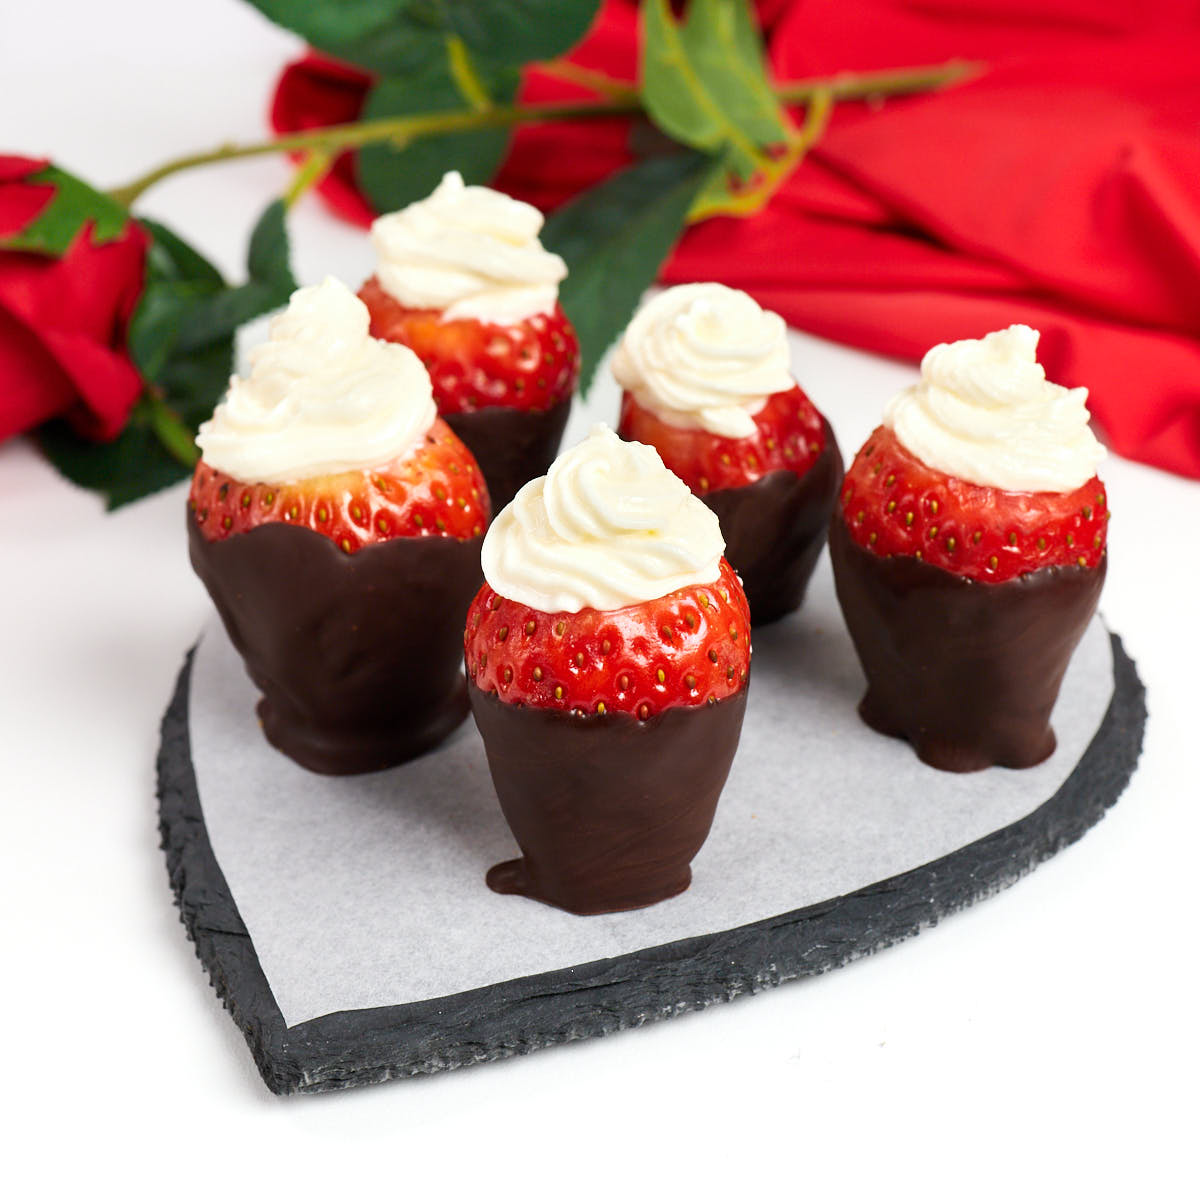 Chocolate covered cheesecake stuffed strawberries on a heart tray.